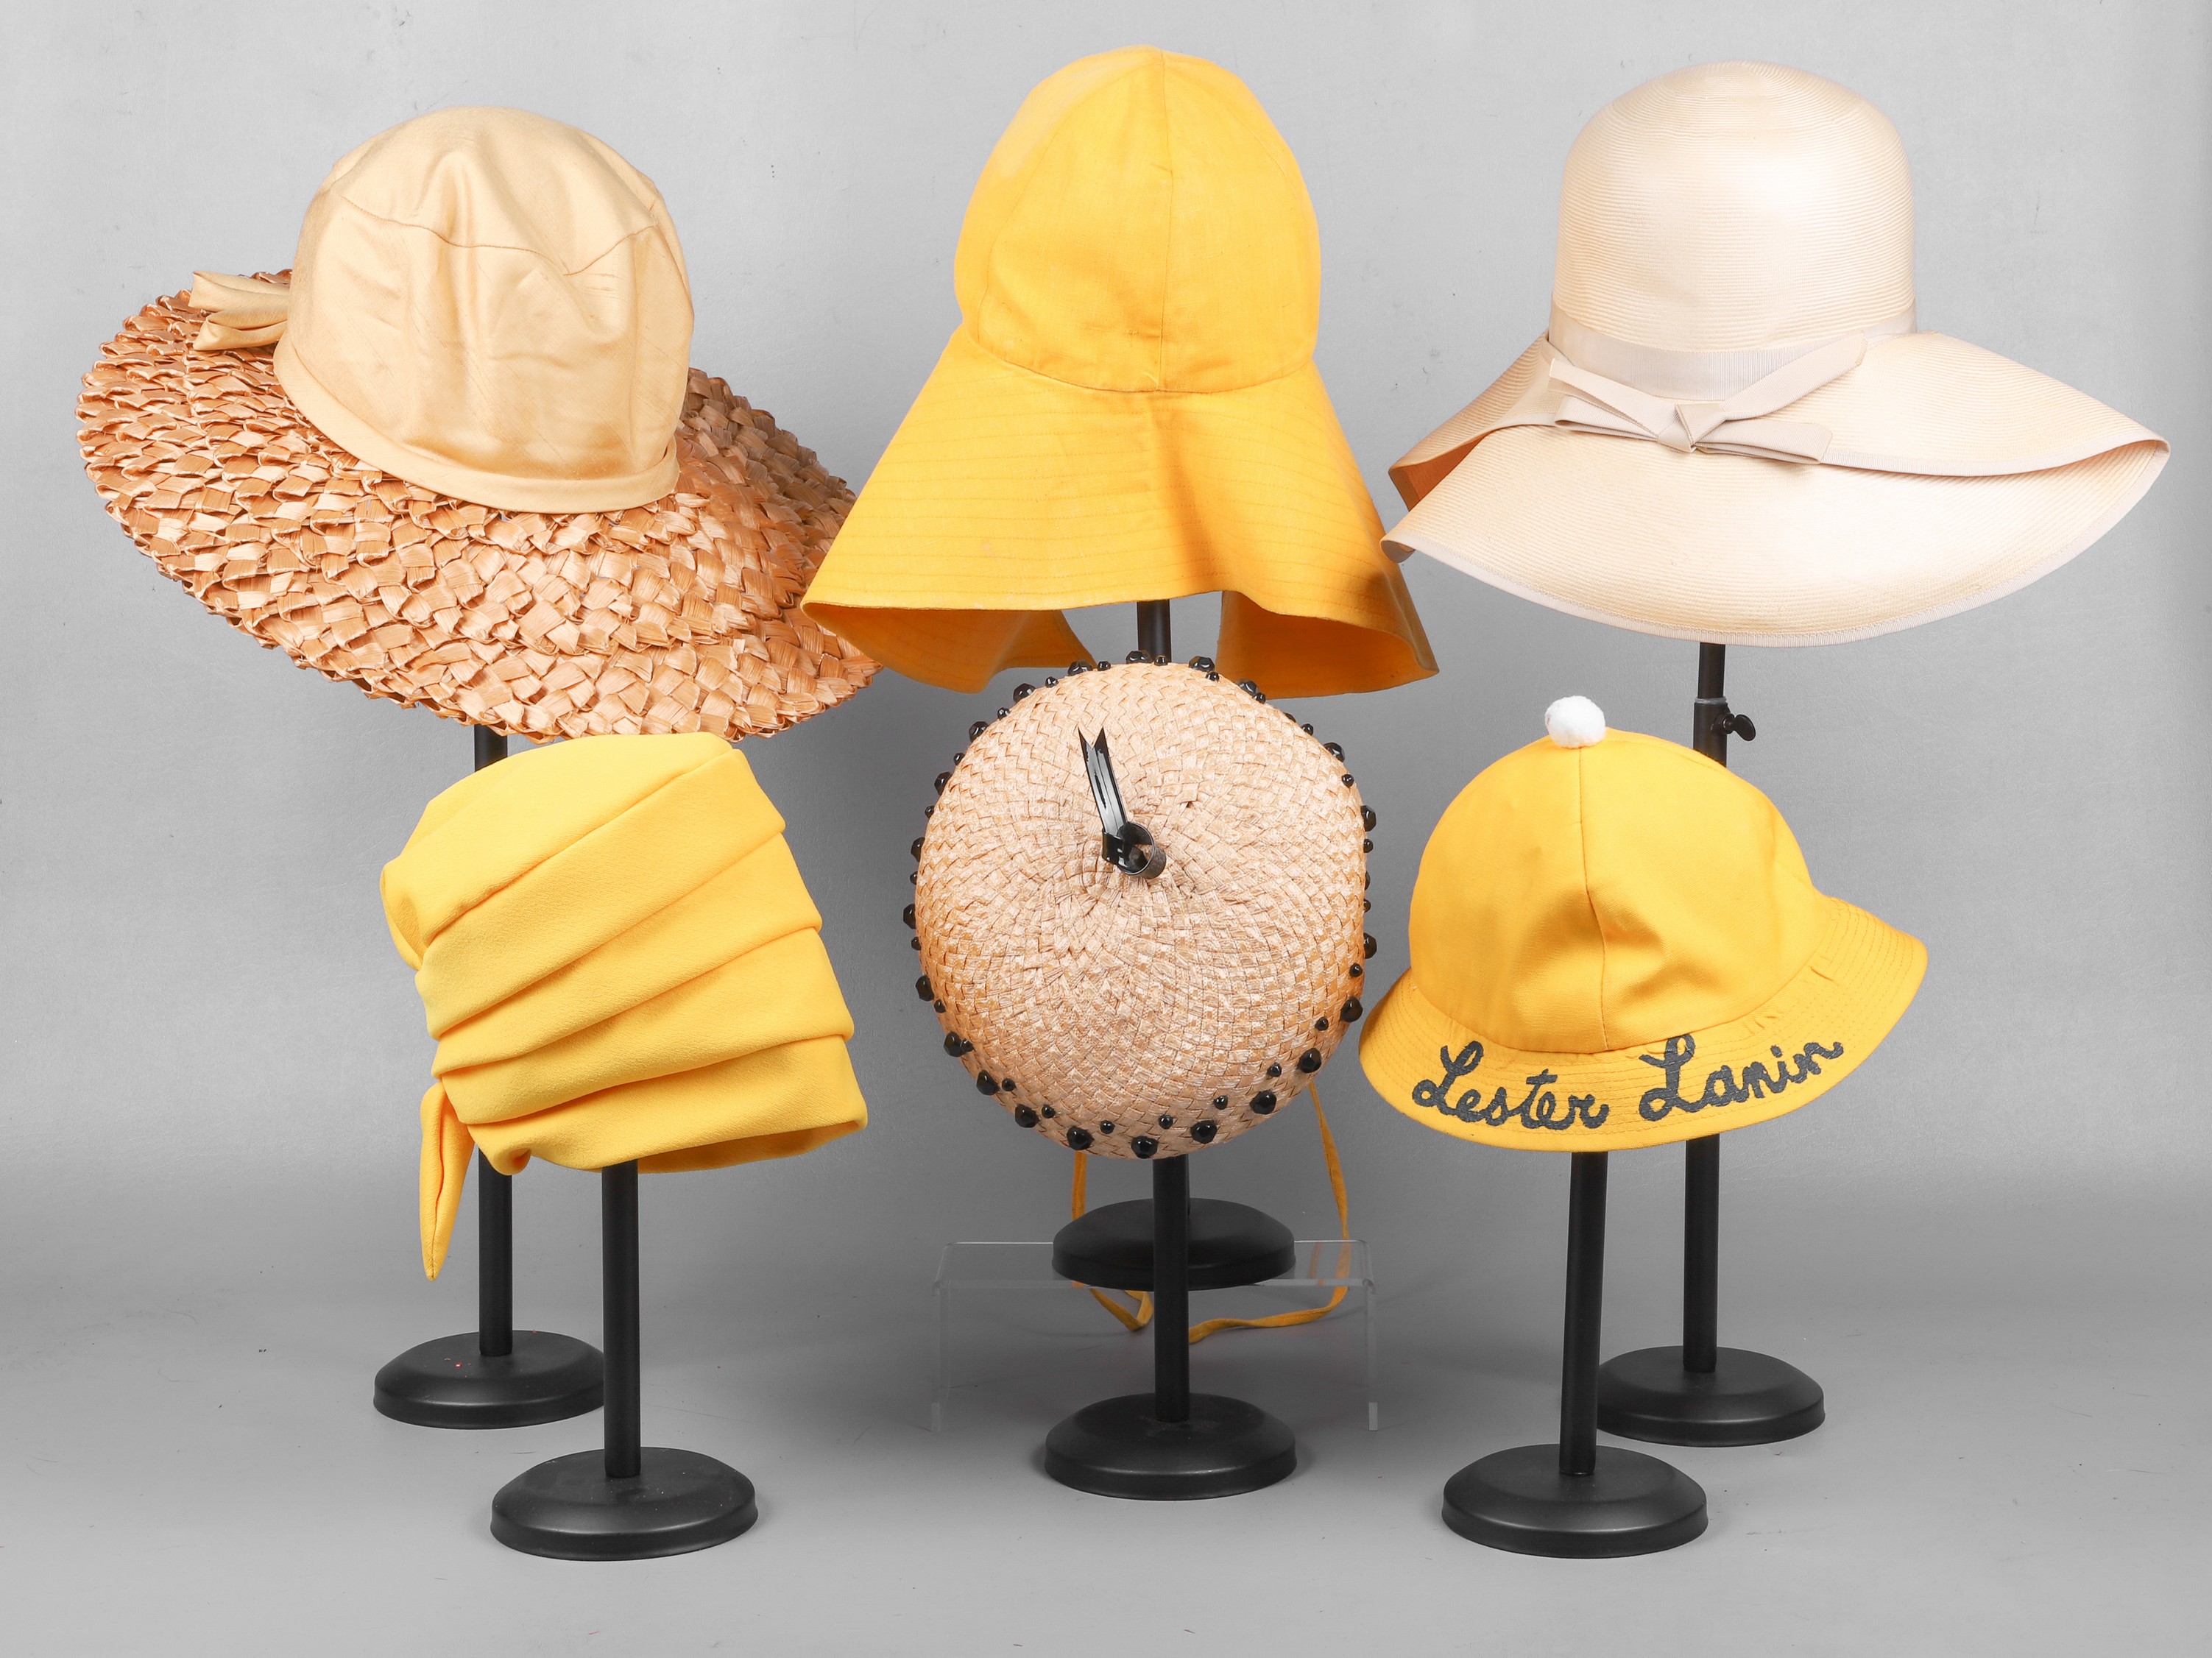  6 60 s Sunhats to include Mr  27a69f